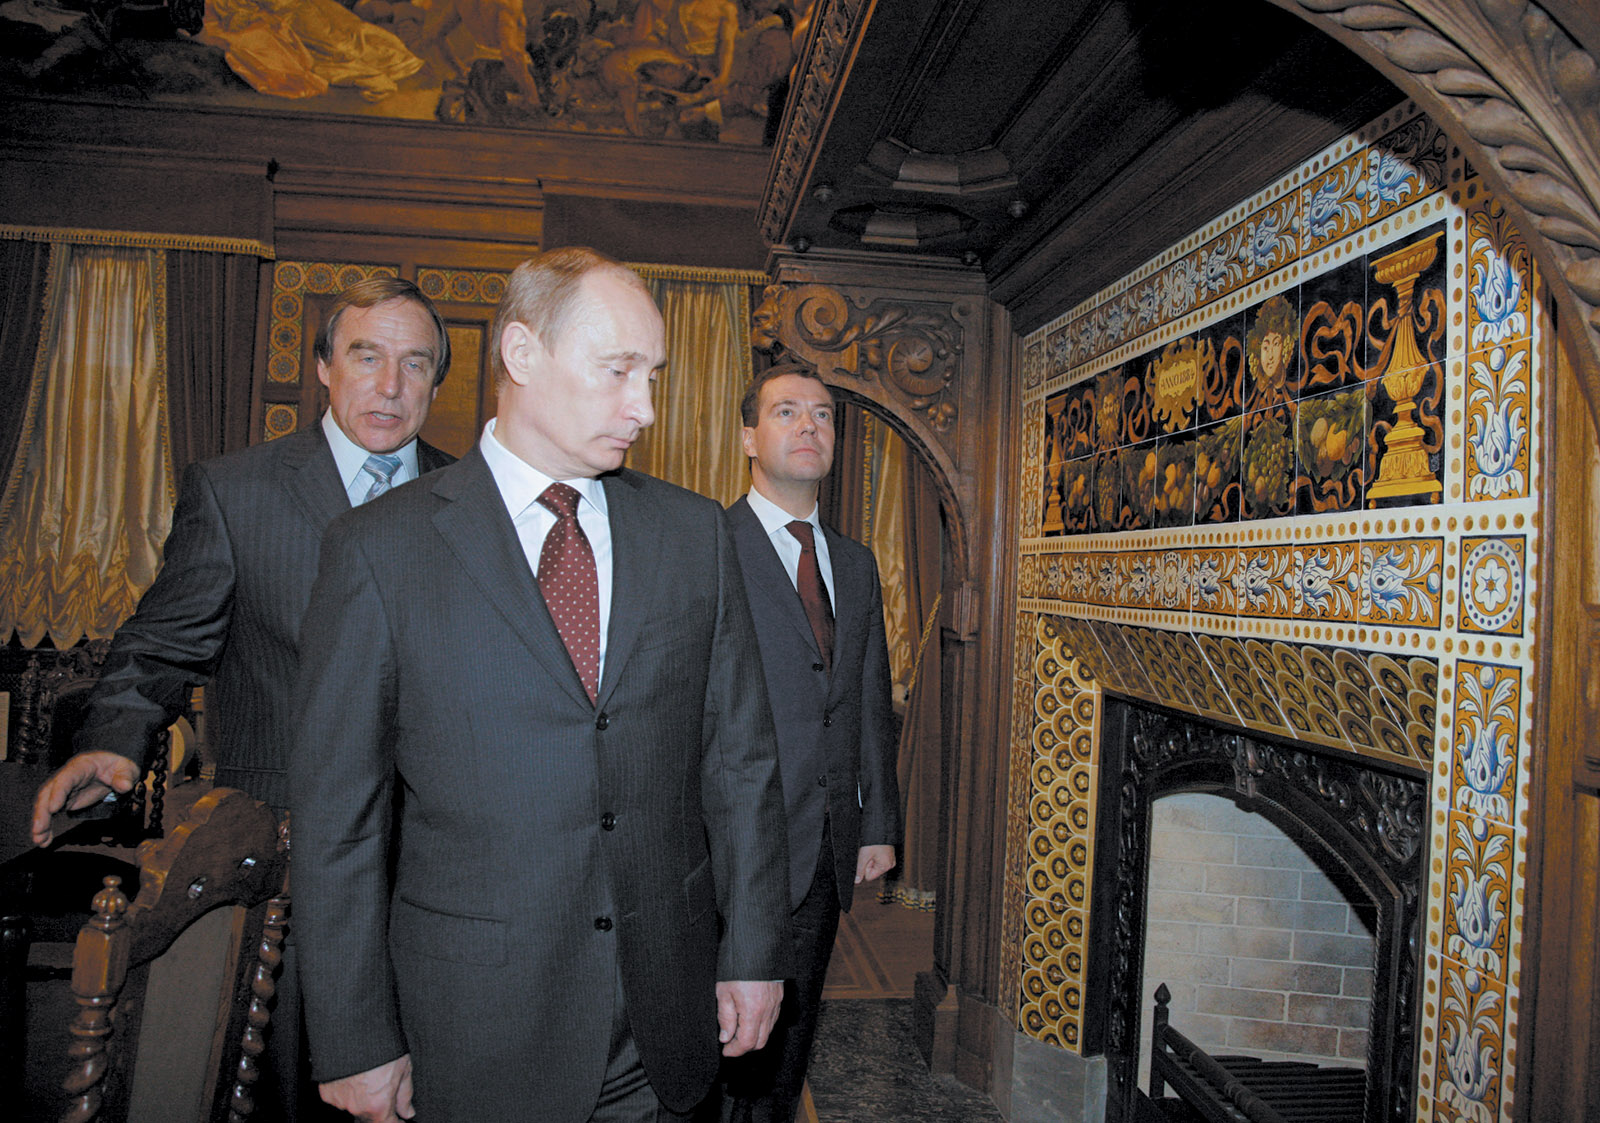 The cellist Sergei Roldugin, left, with Vladimir Putin and Dmitry Medvedev at the St. Petersburg House of Music, November 2009. The Panama Papers show that Roldugin, one of Putin’s old friends, is linked to a number of offshore companies worth hundreds of millions of dollars.